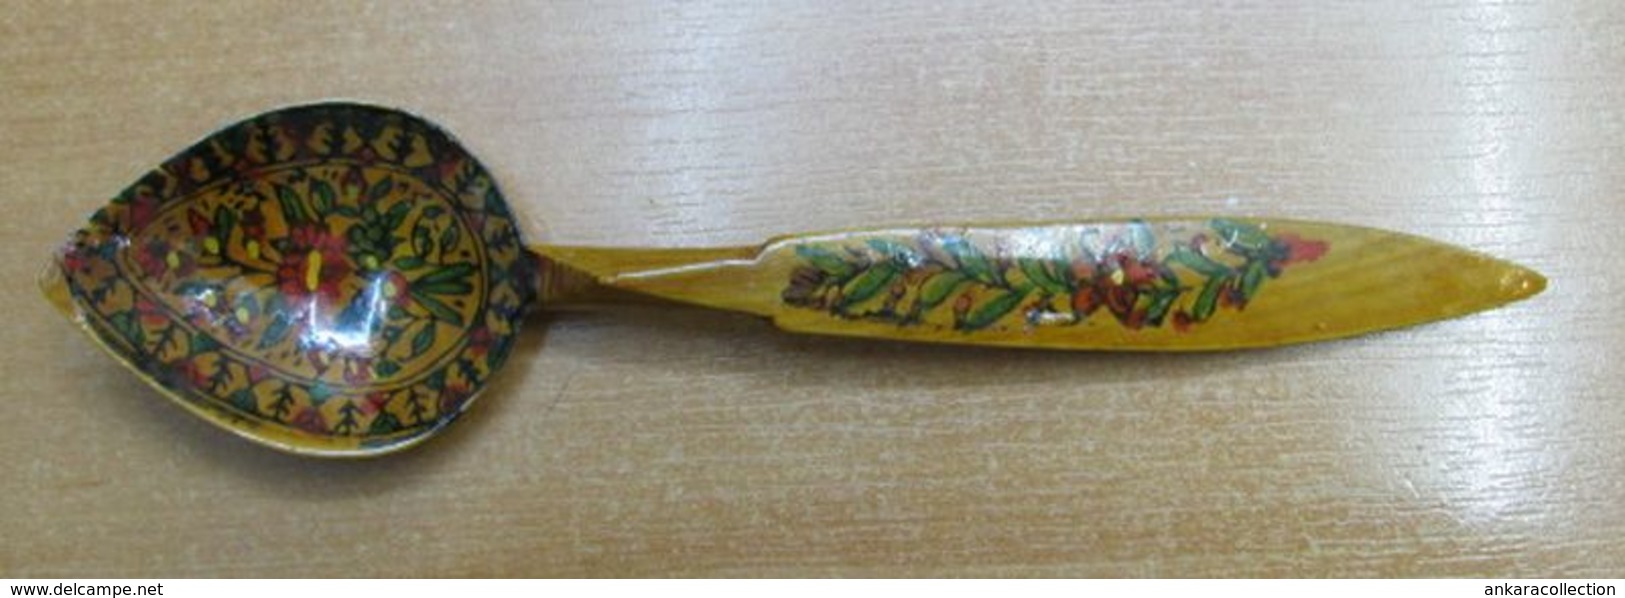 AC - WOODEN SPOON HAND MADE  & PAINTED 1970s FROM TURKEY - Spoons